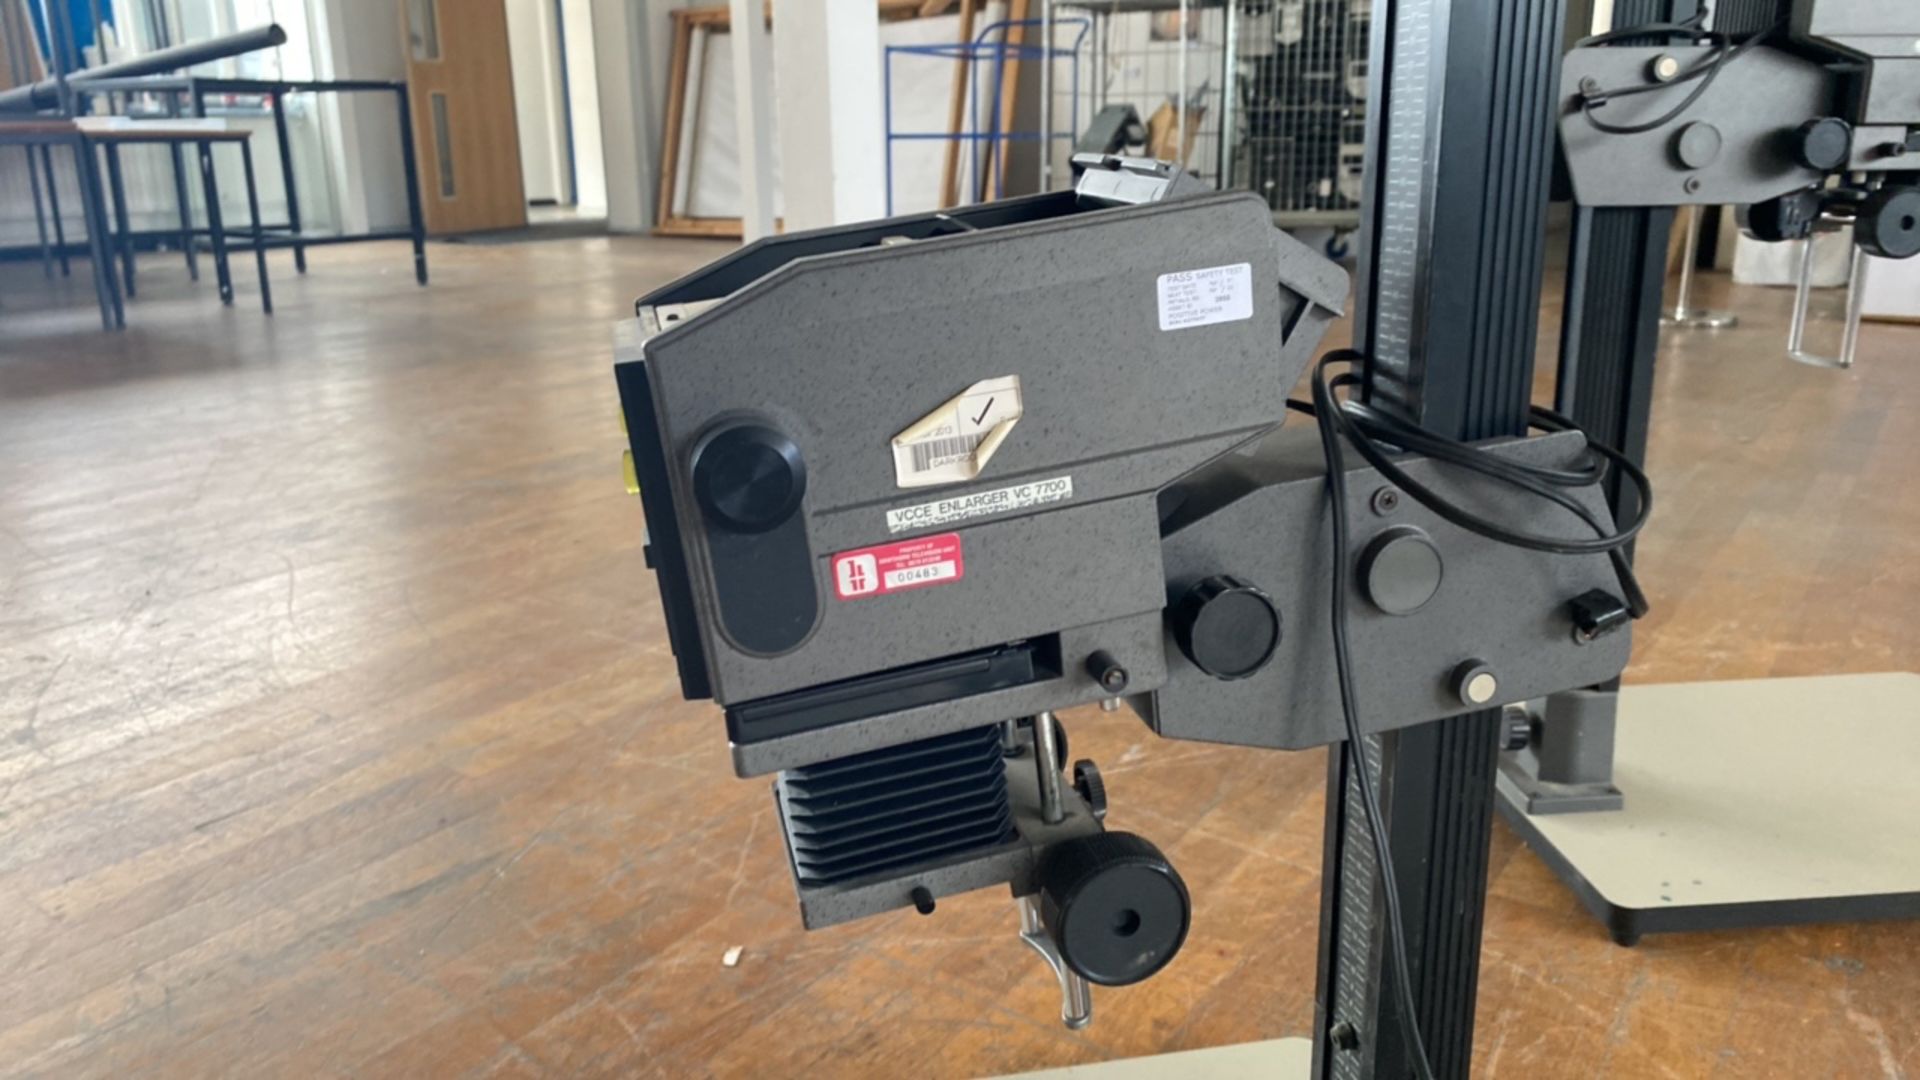 VCE Enlarger VC7700 Projector - Image 3 of 4